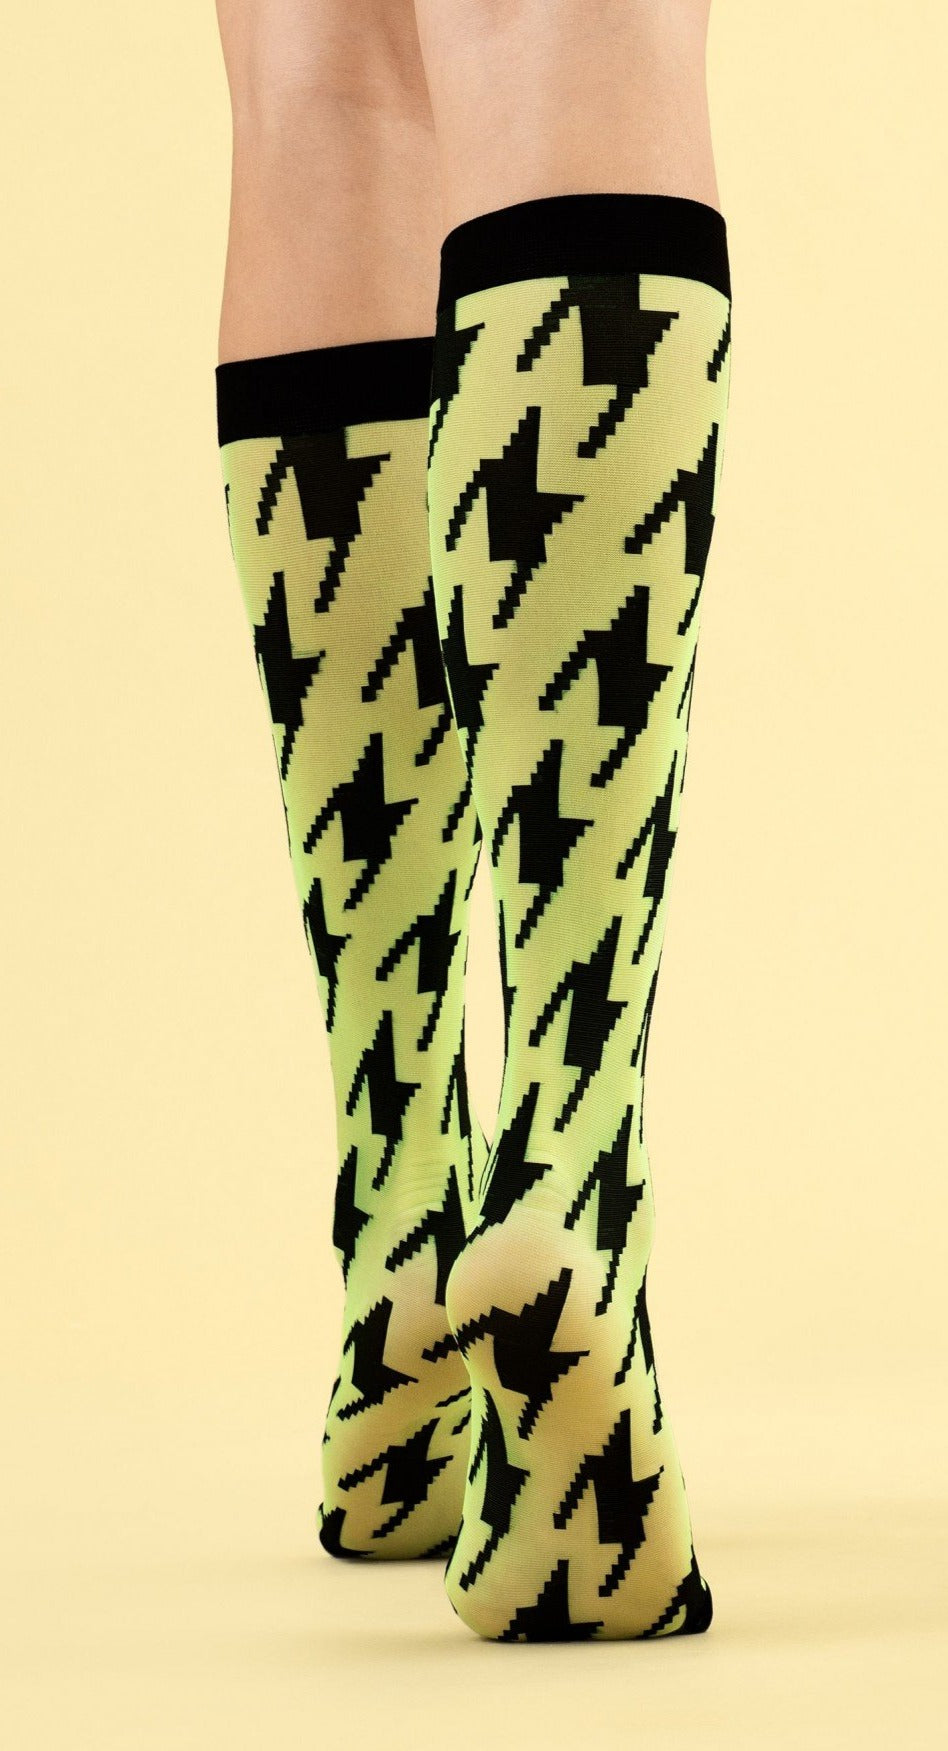 Fiore Grand Prix Knee-highs - Neon green and black sheer fashion knee-high socks with a large black woven houndstooth pattern and deep comfort.